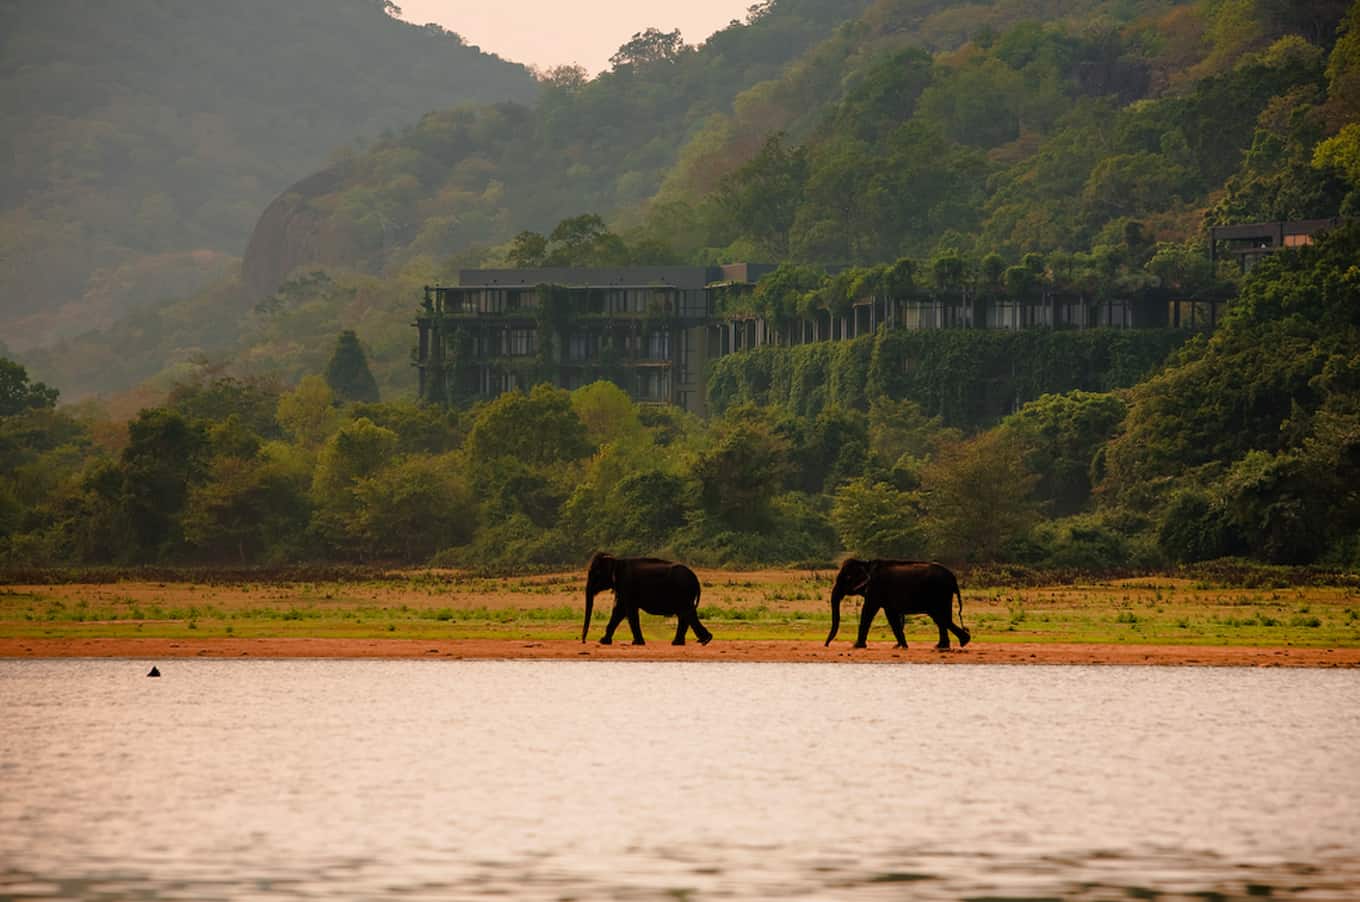 Two Elephants walking between a lake and the Kandalama hotel in Dambulla which is surrounded by hills and forests